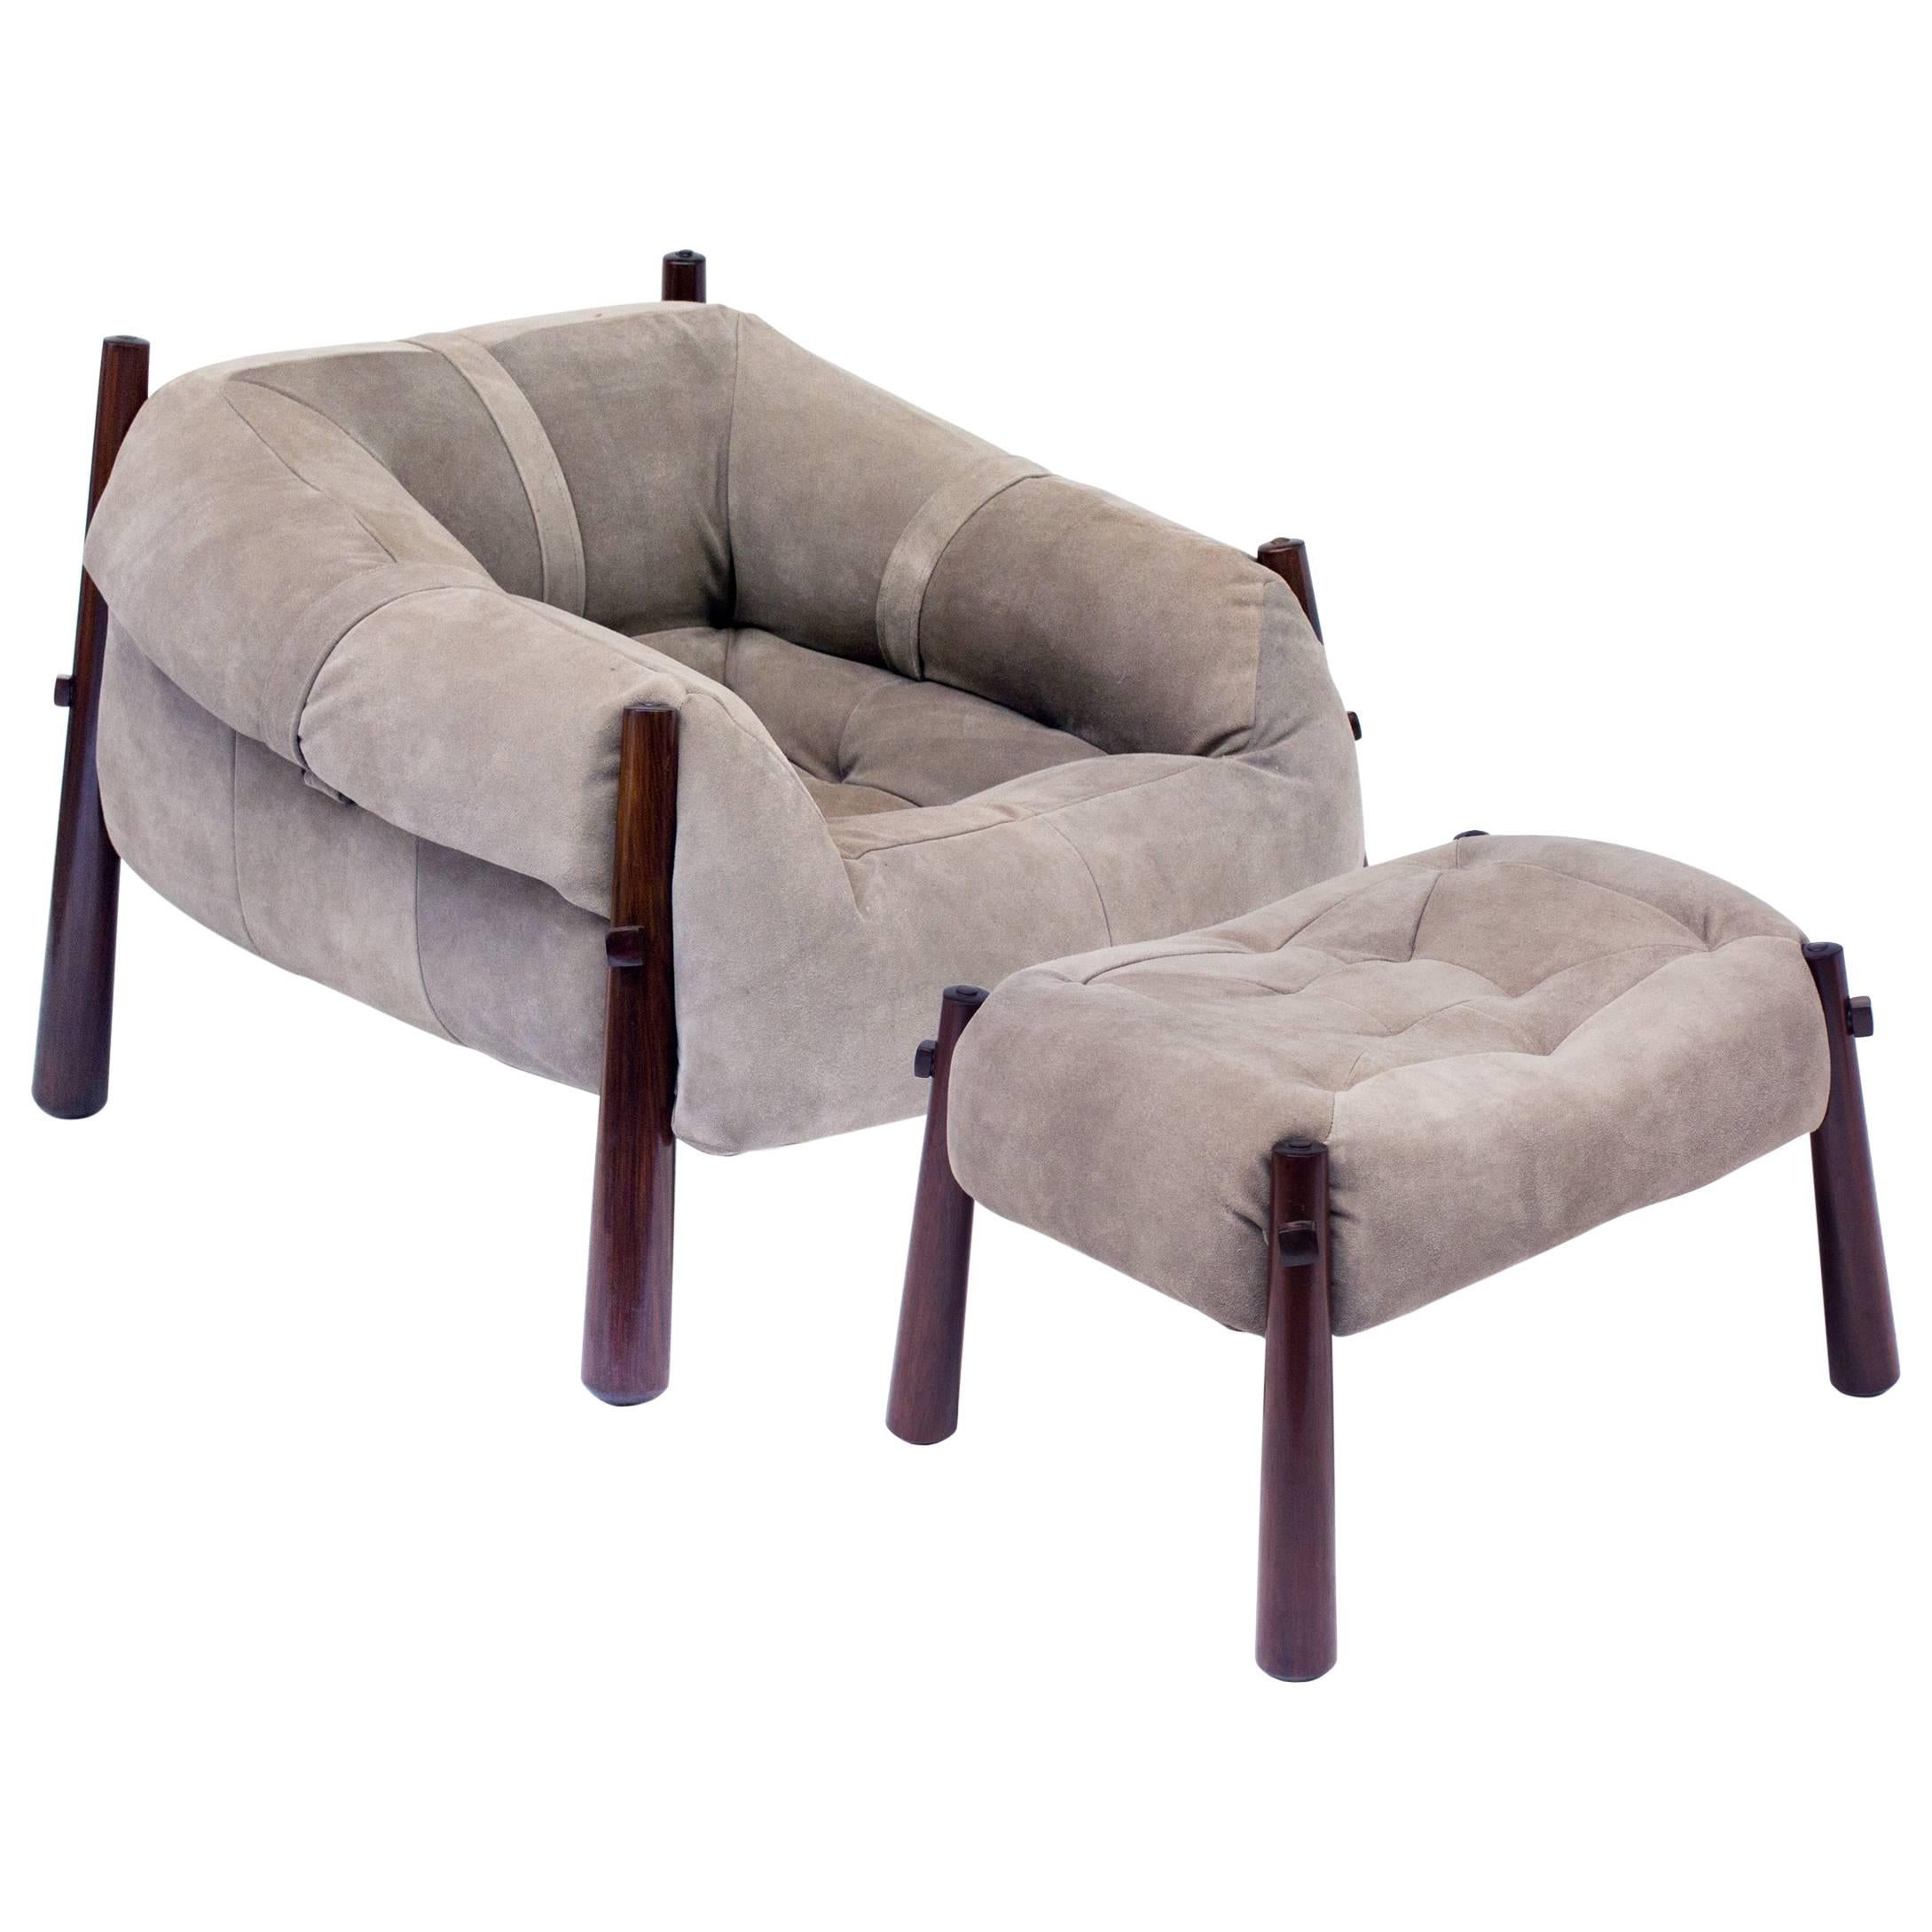 MP-81 Armchair Suede Upholstery by Brazilian Designer Percival Lafer